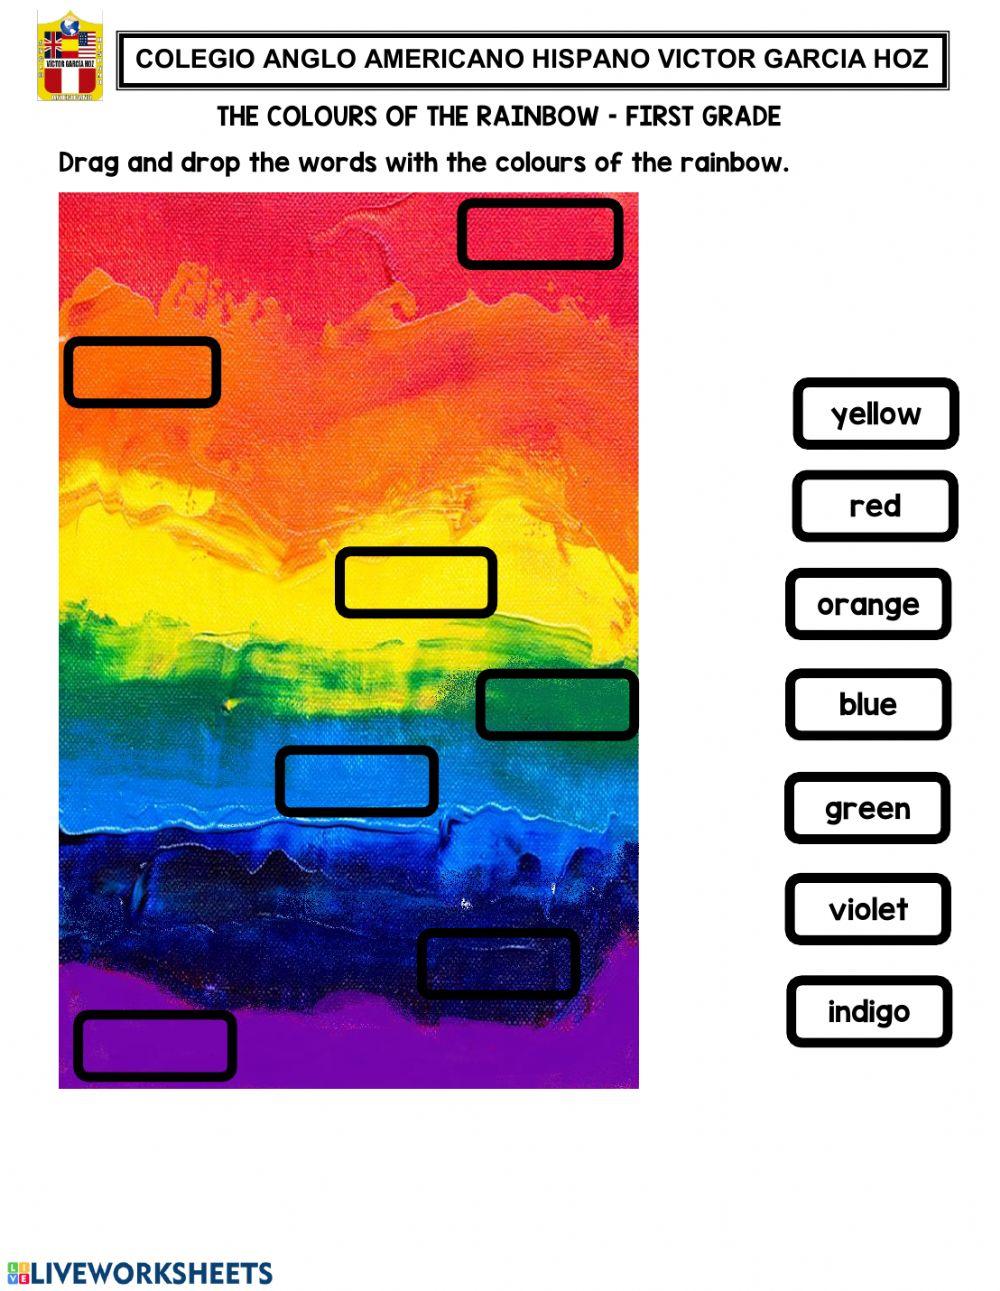 The colours of the rainbow – first grade